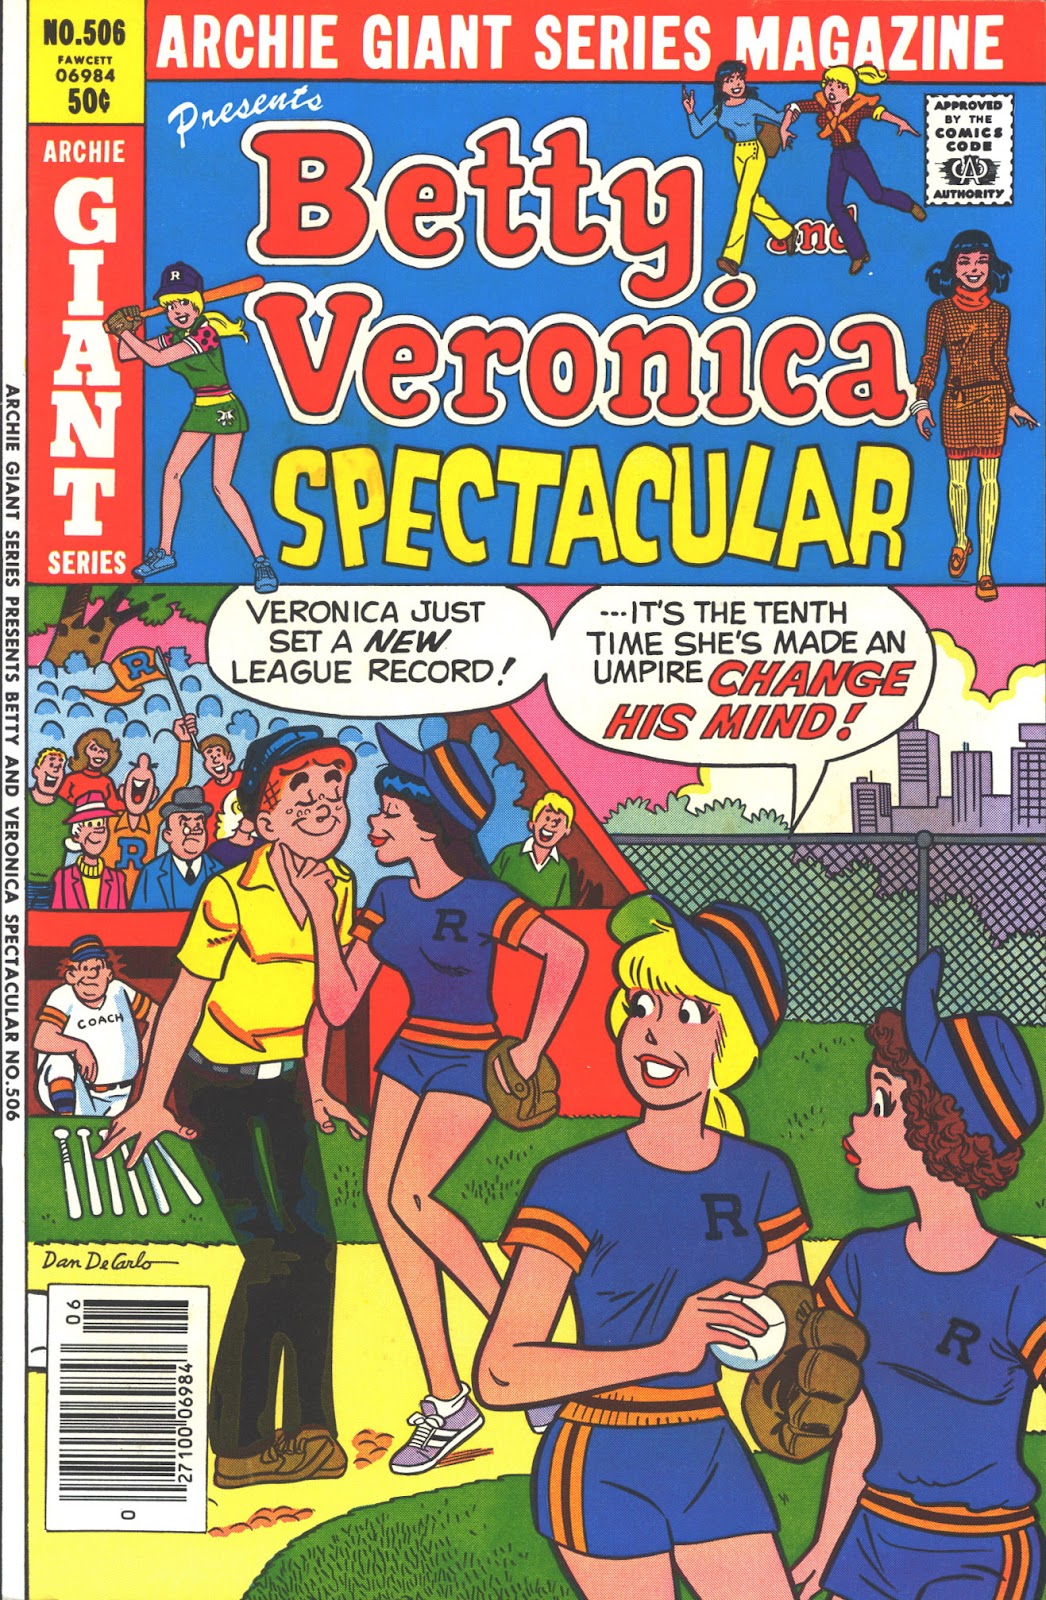 Archie Giant Series Magazine 506 Page 1